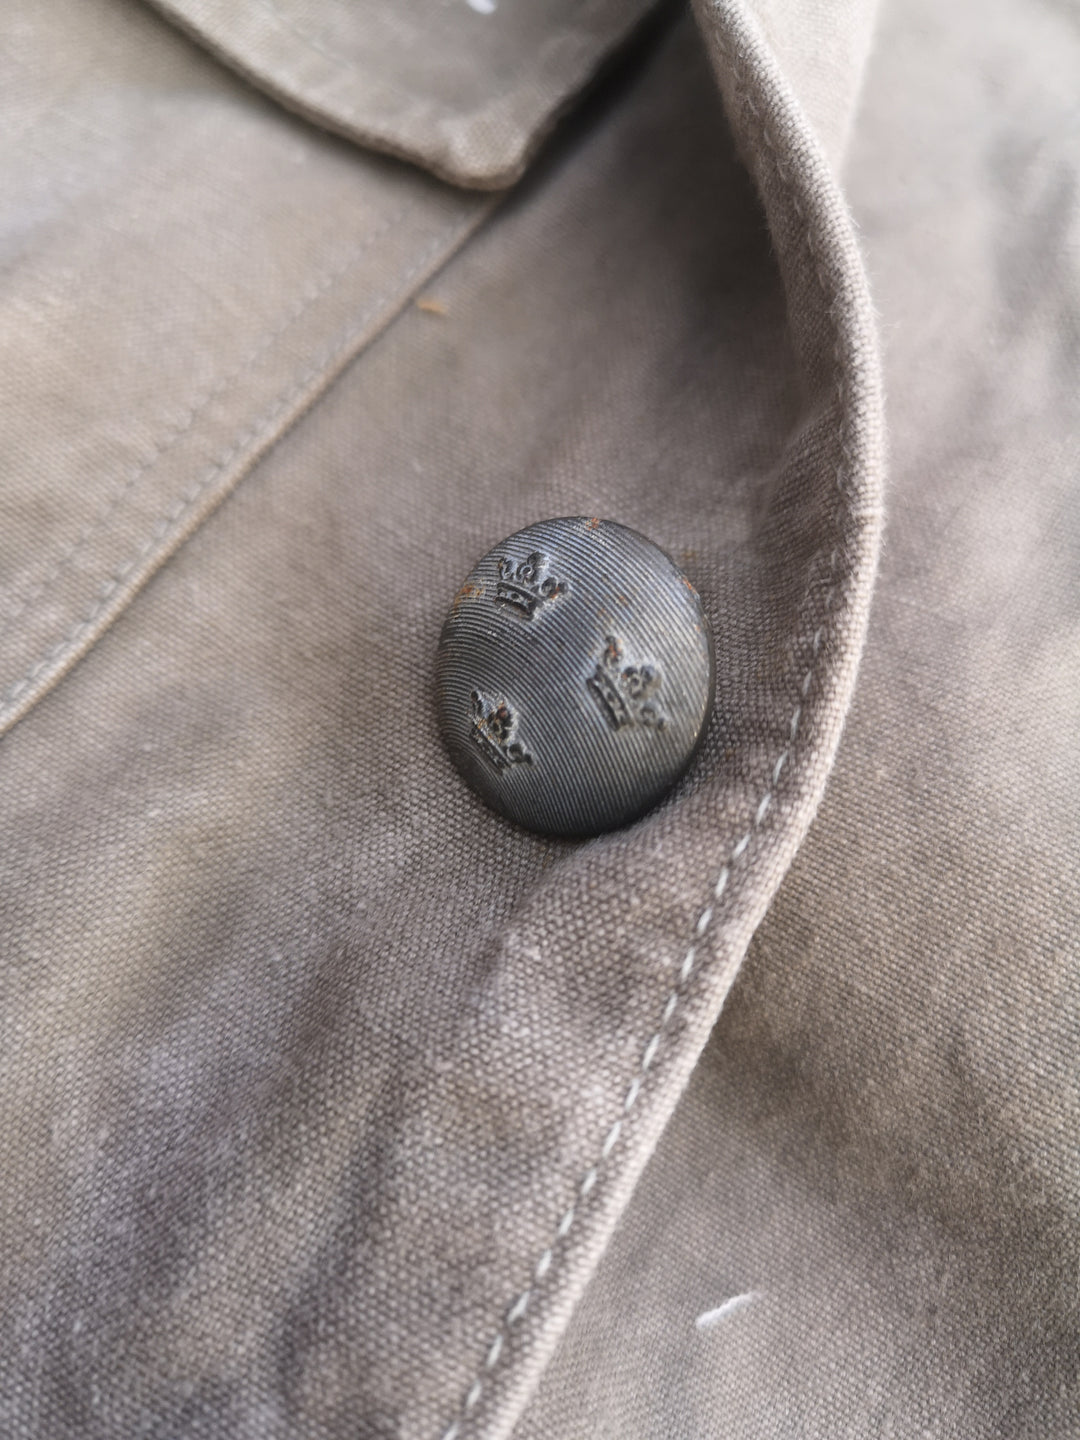 close up shot of fastening button featuring three crowns